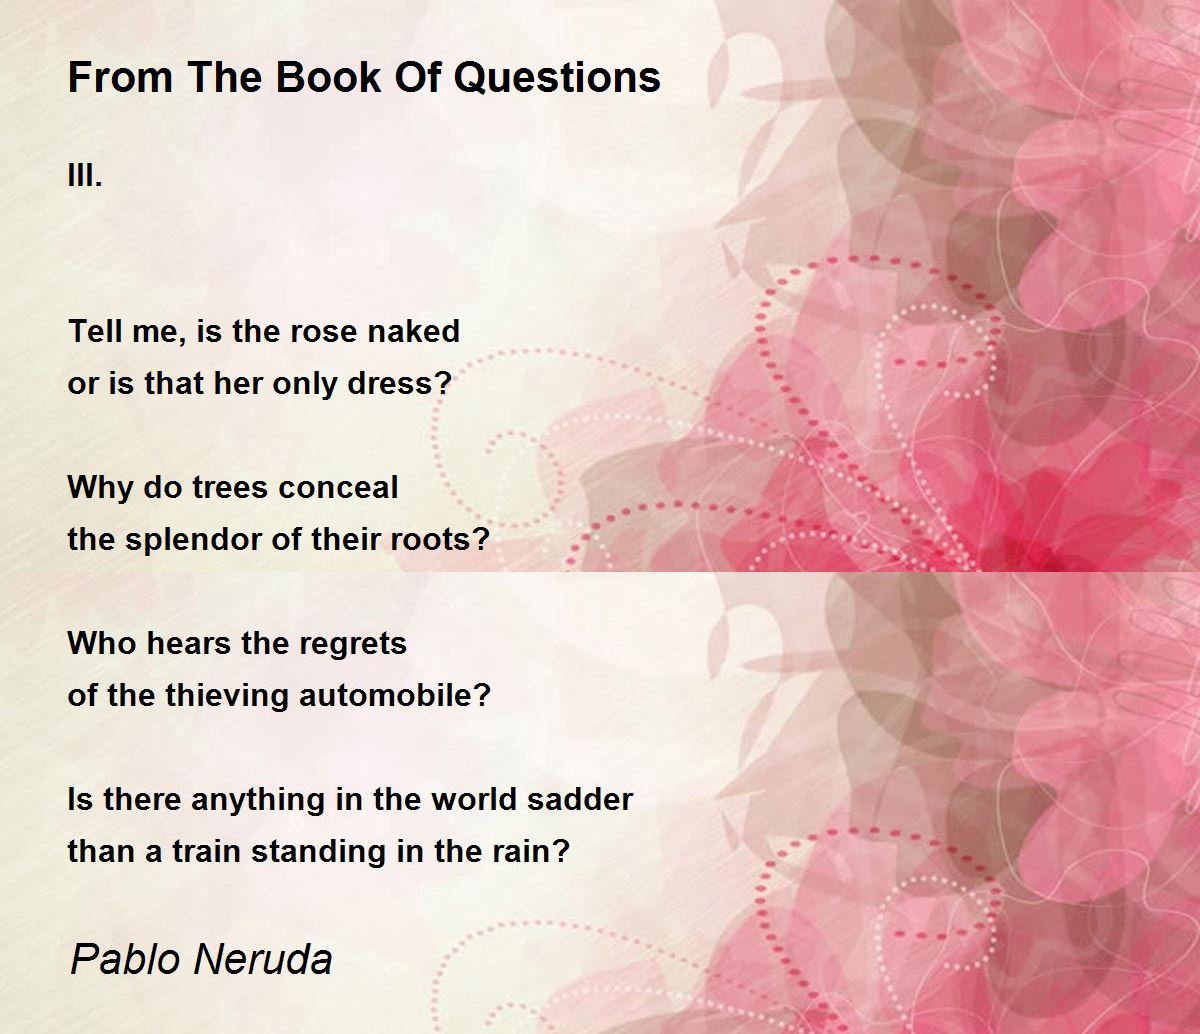 From The Book Of Questions Poem by Pablo Neruda - Poem Hunter